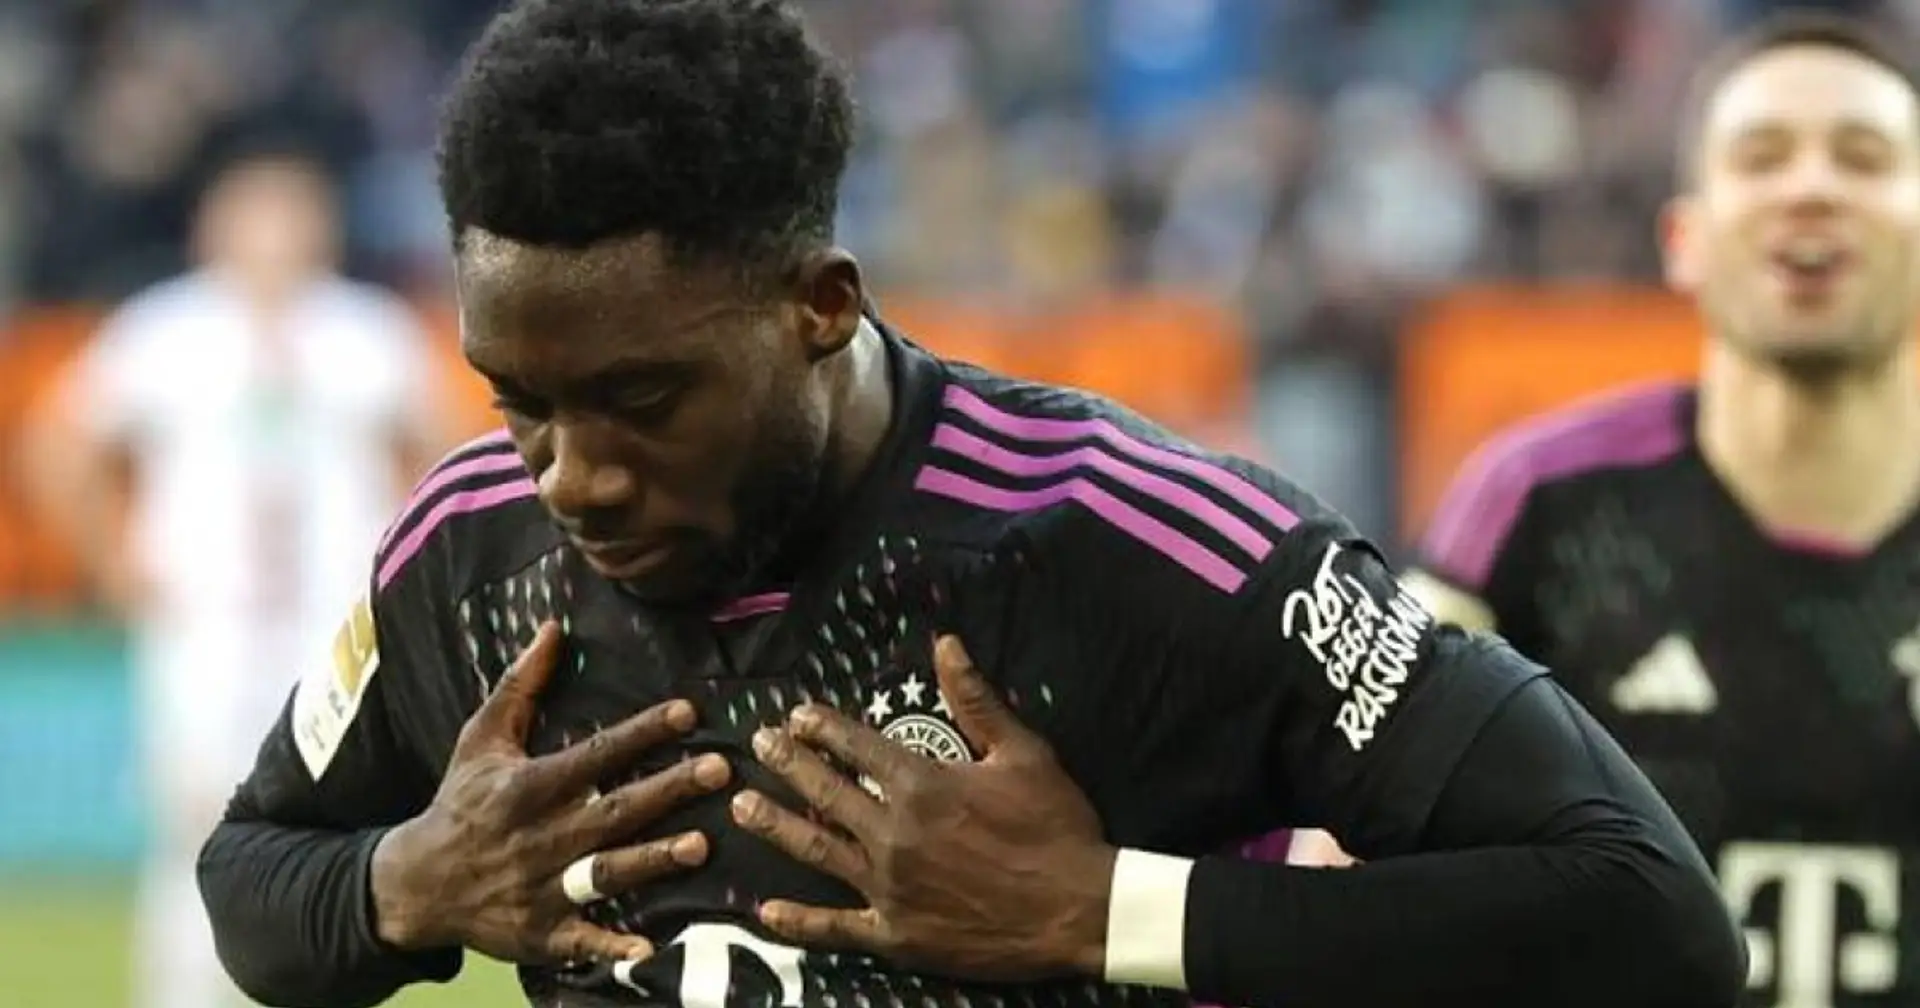 Neues wichtiges Update im Fall Alphonso Davies-Real Madrid